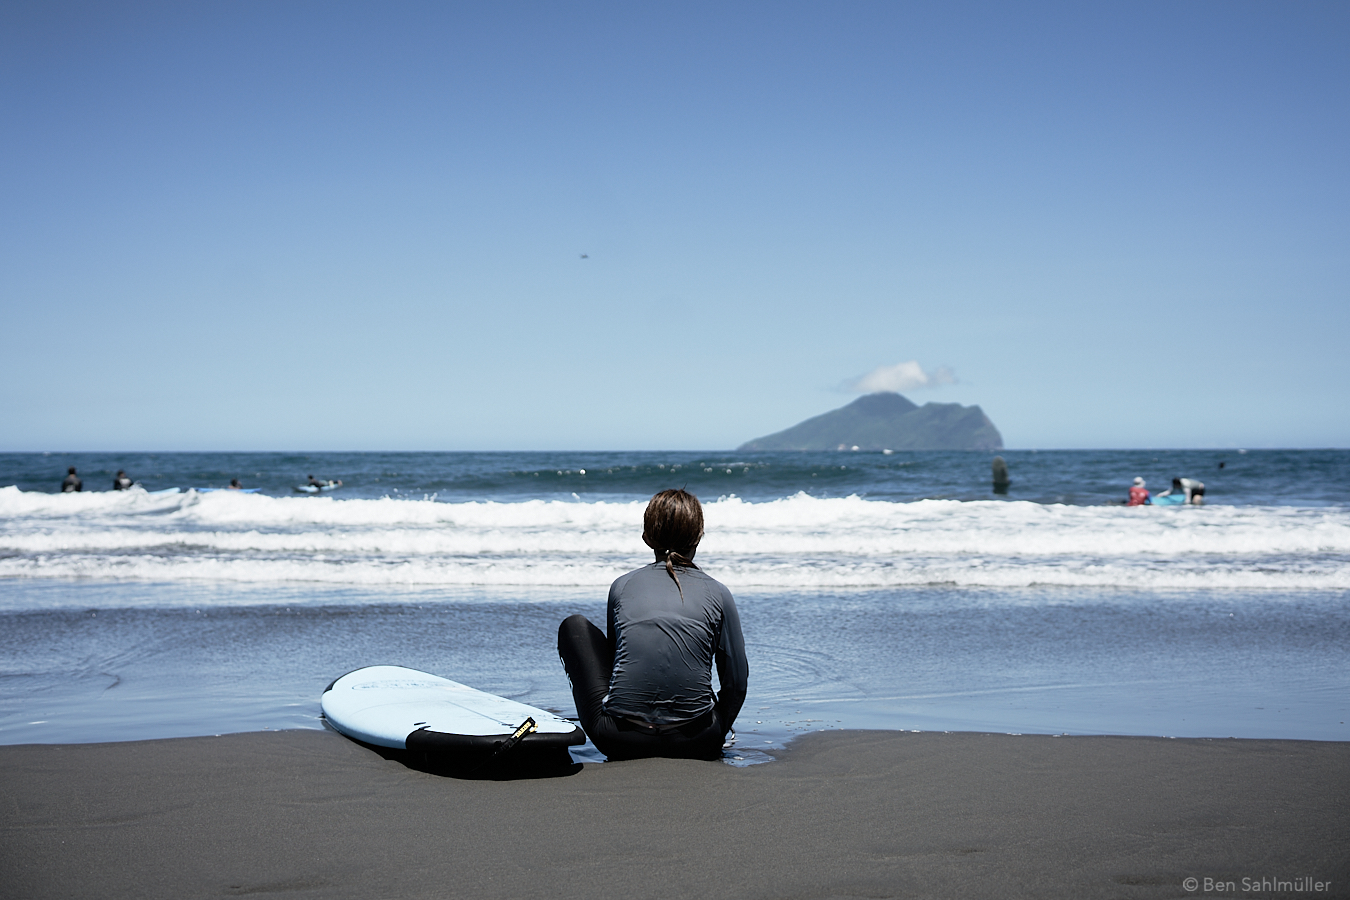 A women sitting at the waterfront on the beach. The sand has a dark grey, her board next to her has the color of the sea. She is mesmerized by the Ocean, looking out towards an island in the back.